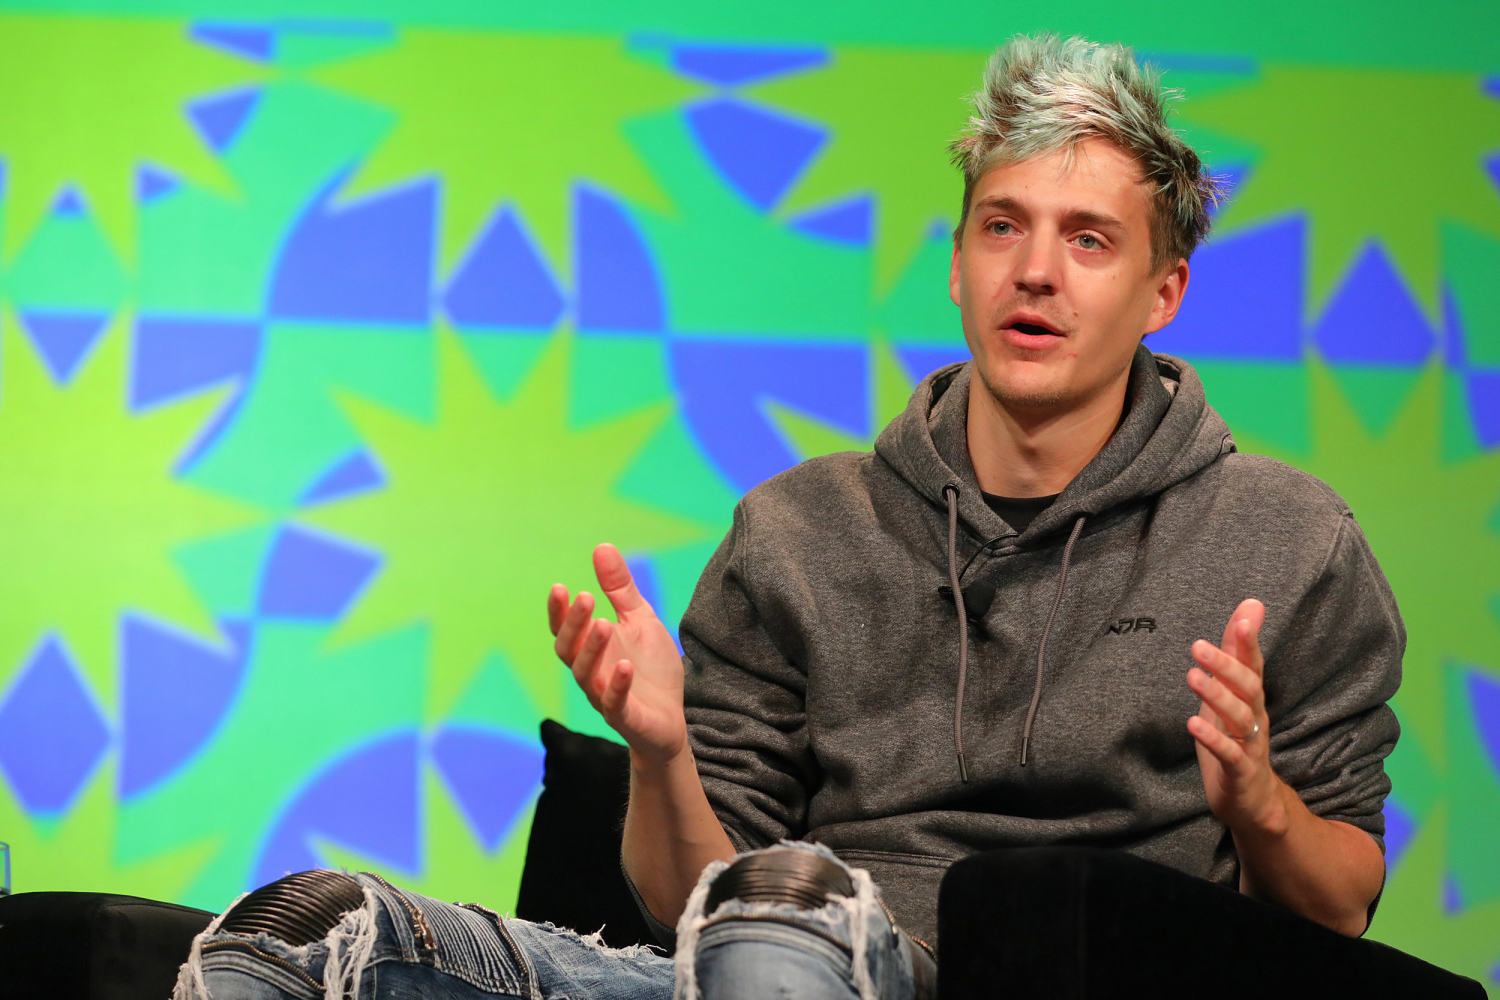 Ninja, one of Twitch and YouTube's most popular video game streamers, shares cancer diagnosis